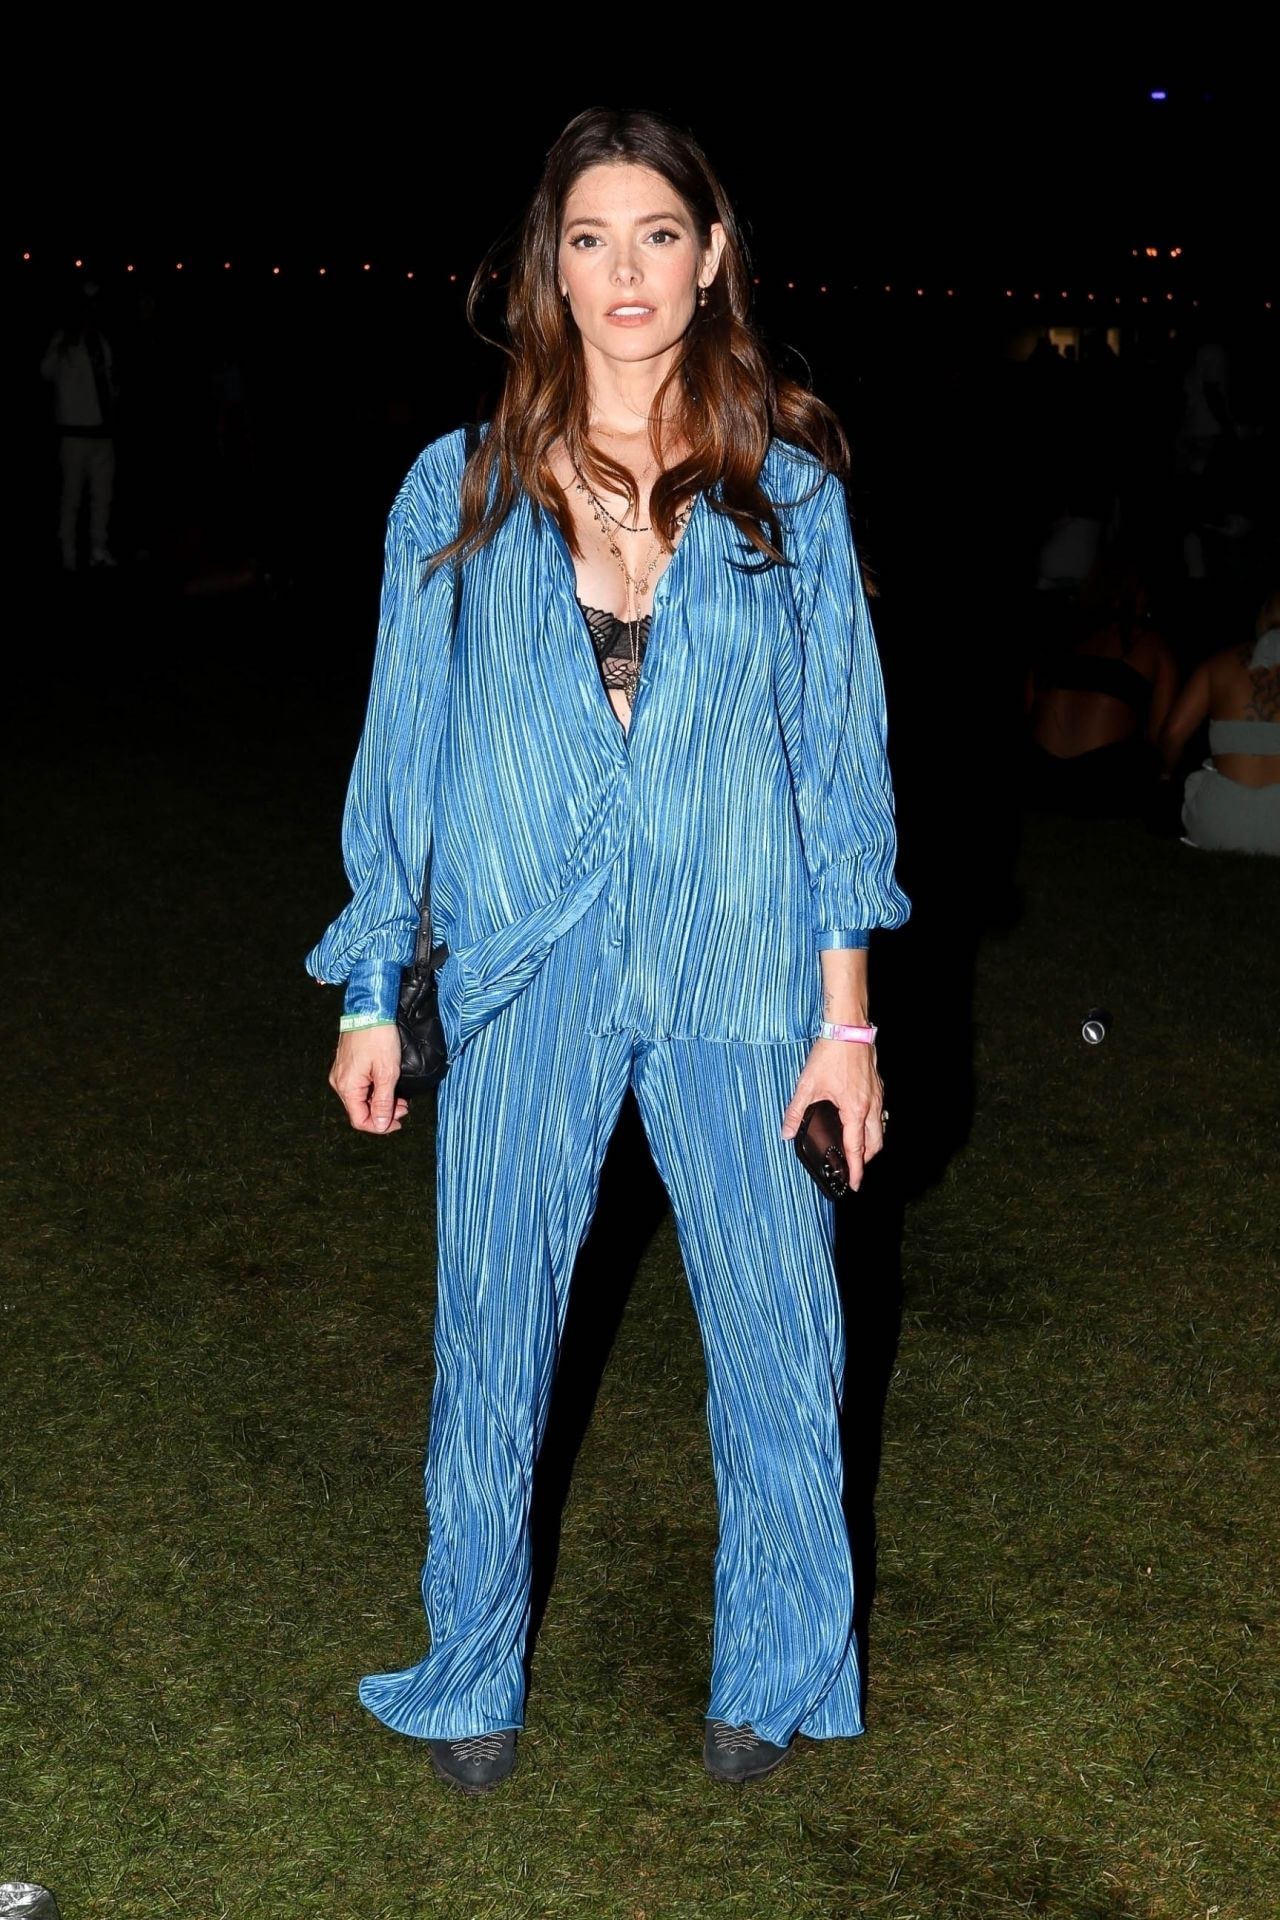 Ashley Greene  In Blue  Baggy Shirt Under Bralette With Pants At Coachella Valley Music and Arts Festival in Indio